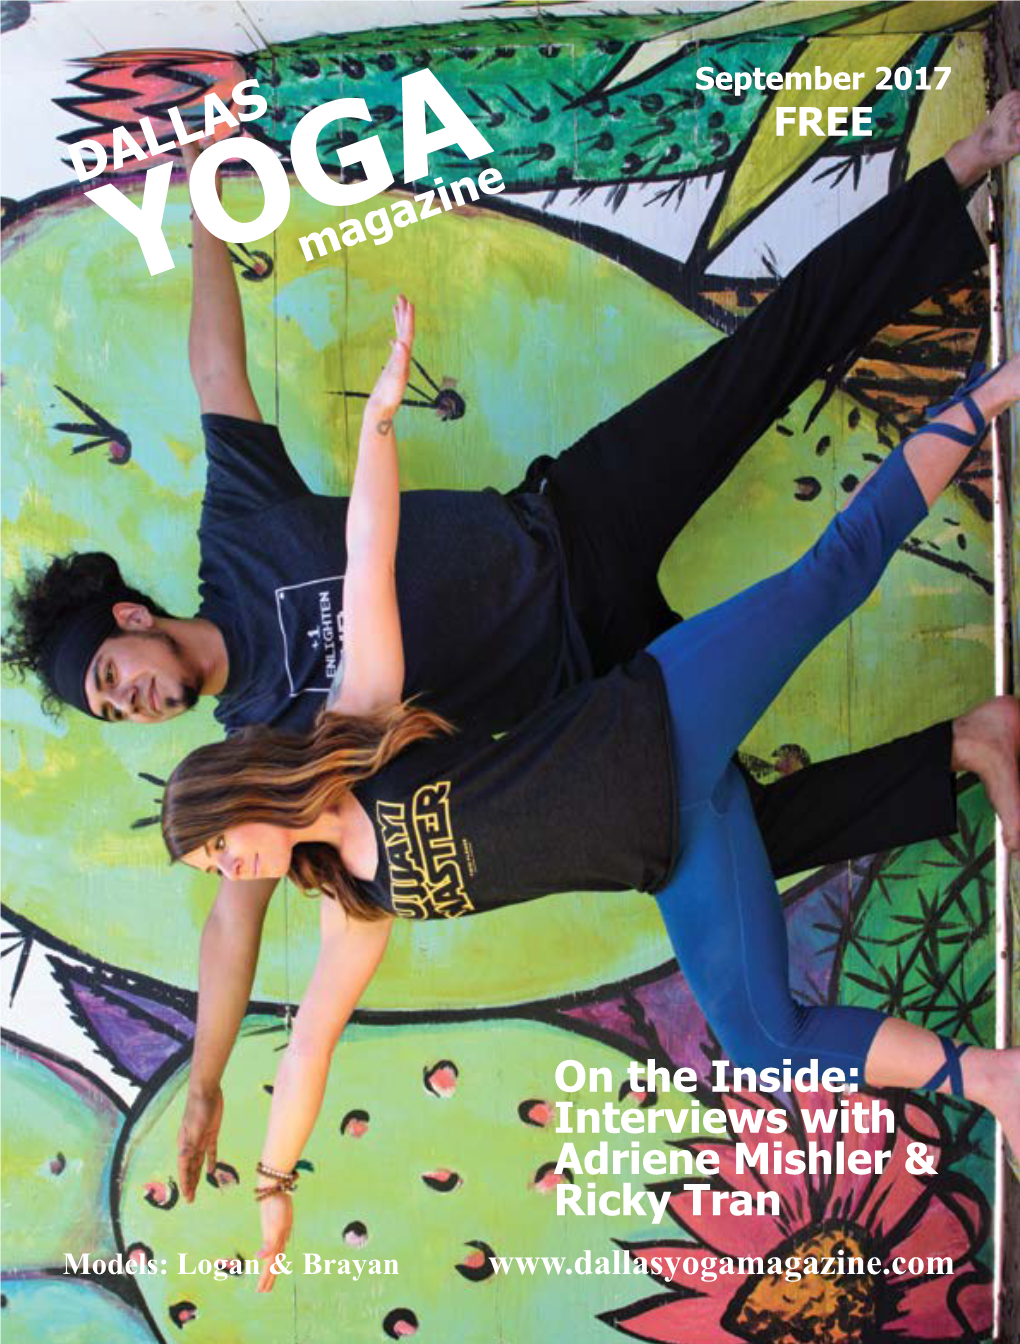 Dallas Yoga Magazine Presents Yoga Peep Show! Sunday, September 24Th Noon-6:30Ish You Are Chaufeured To